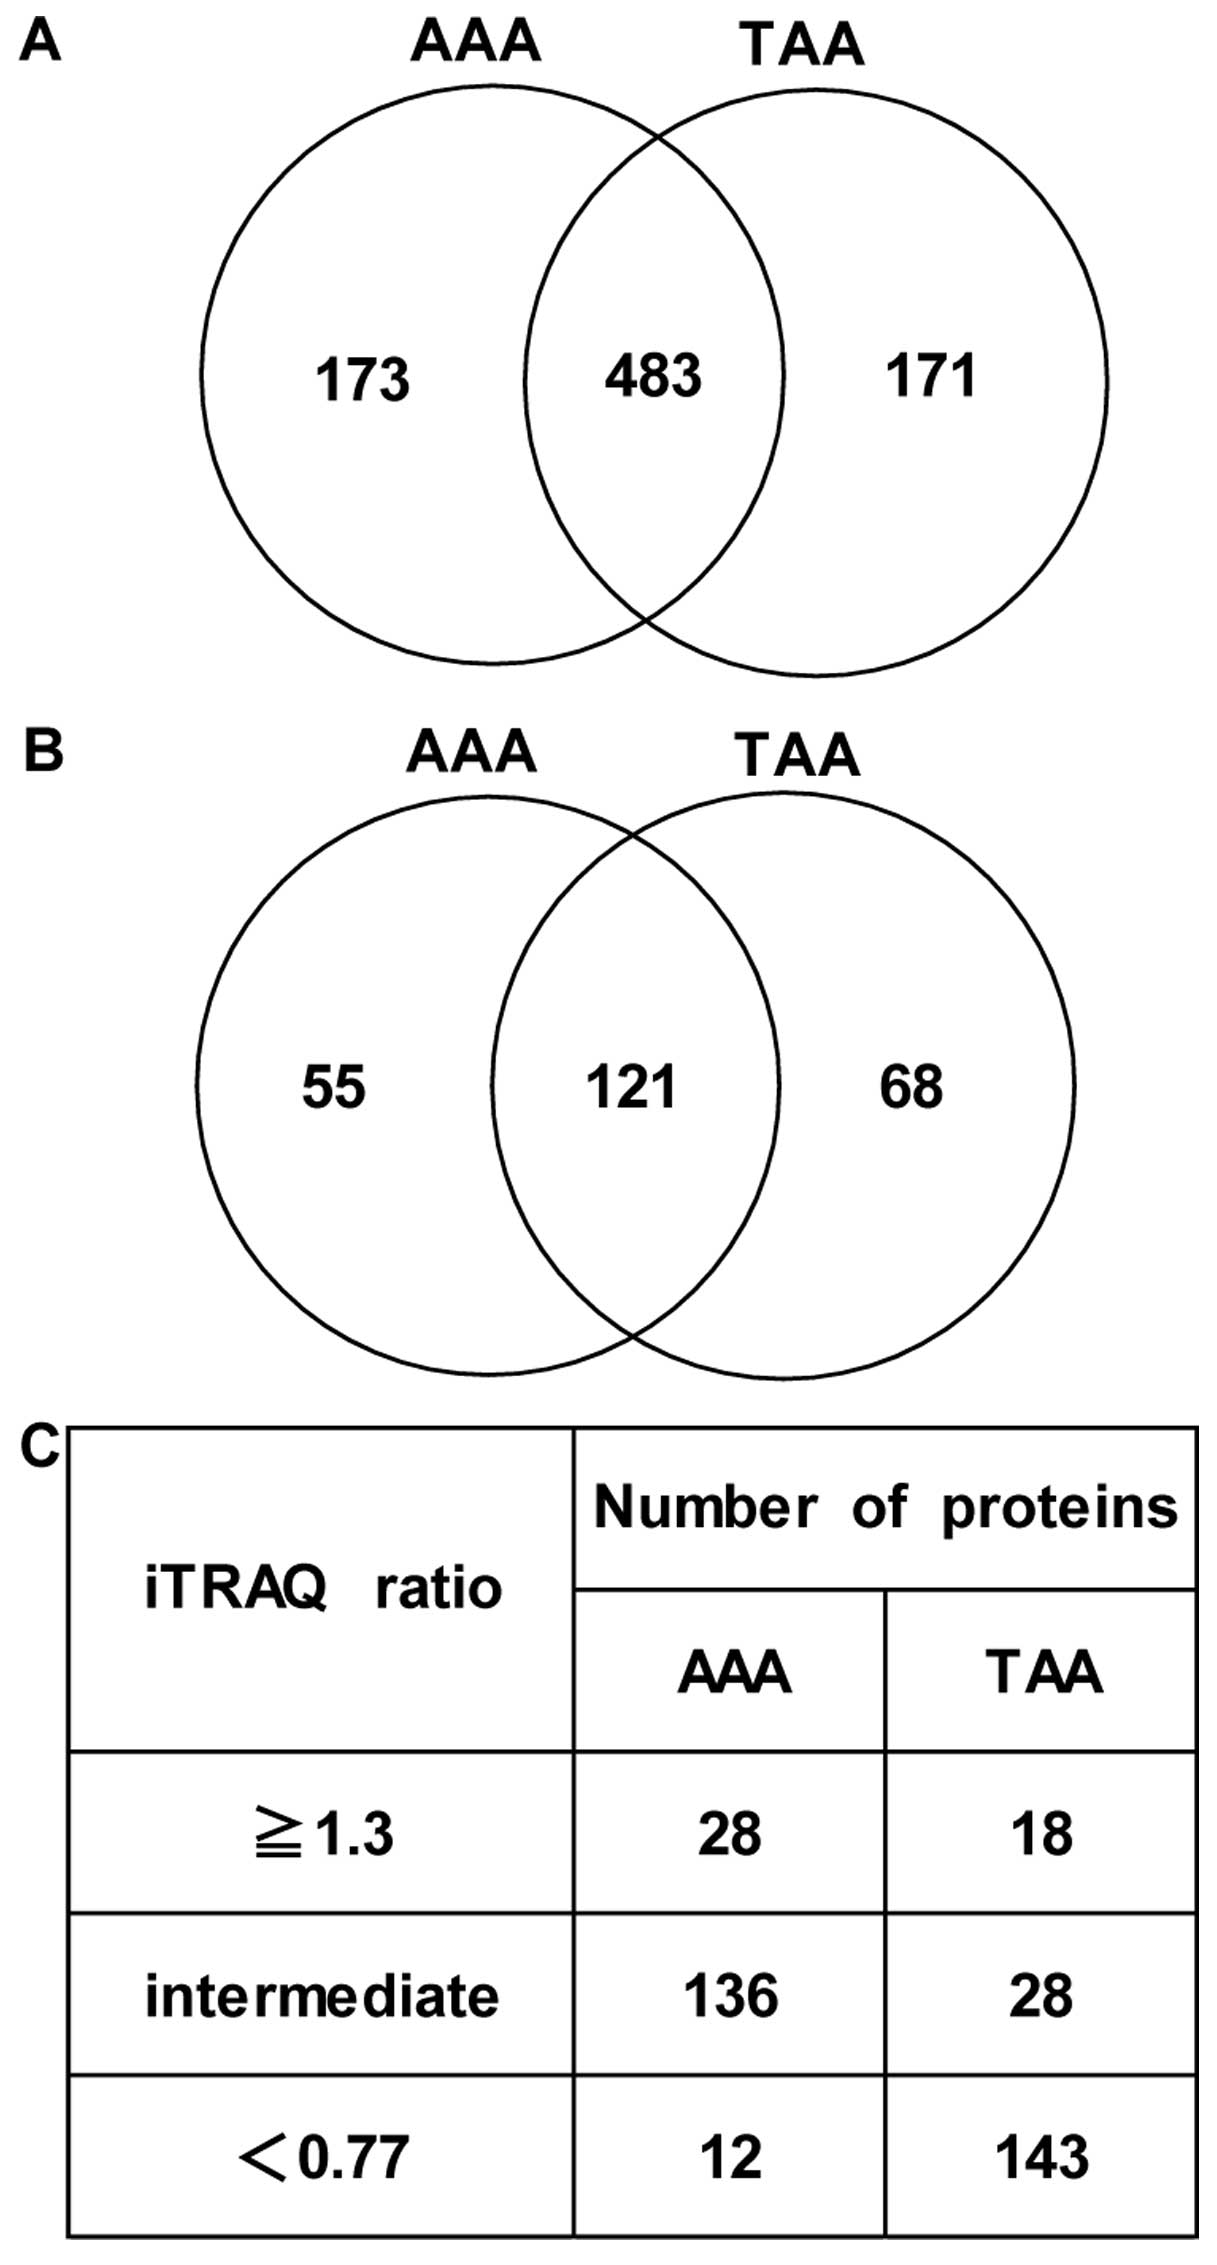 Proteomic comparison between abdominal and thoracic aortic aneurysms